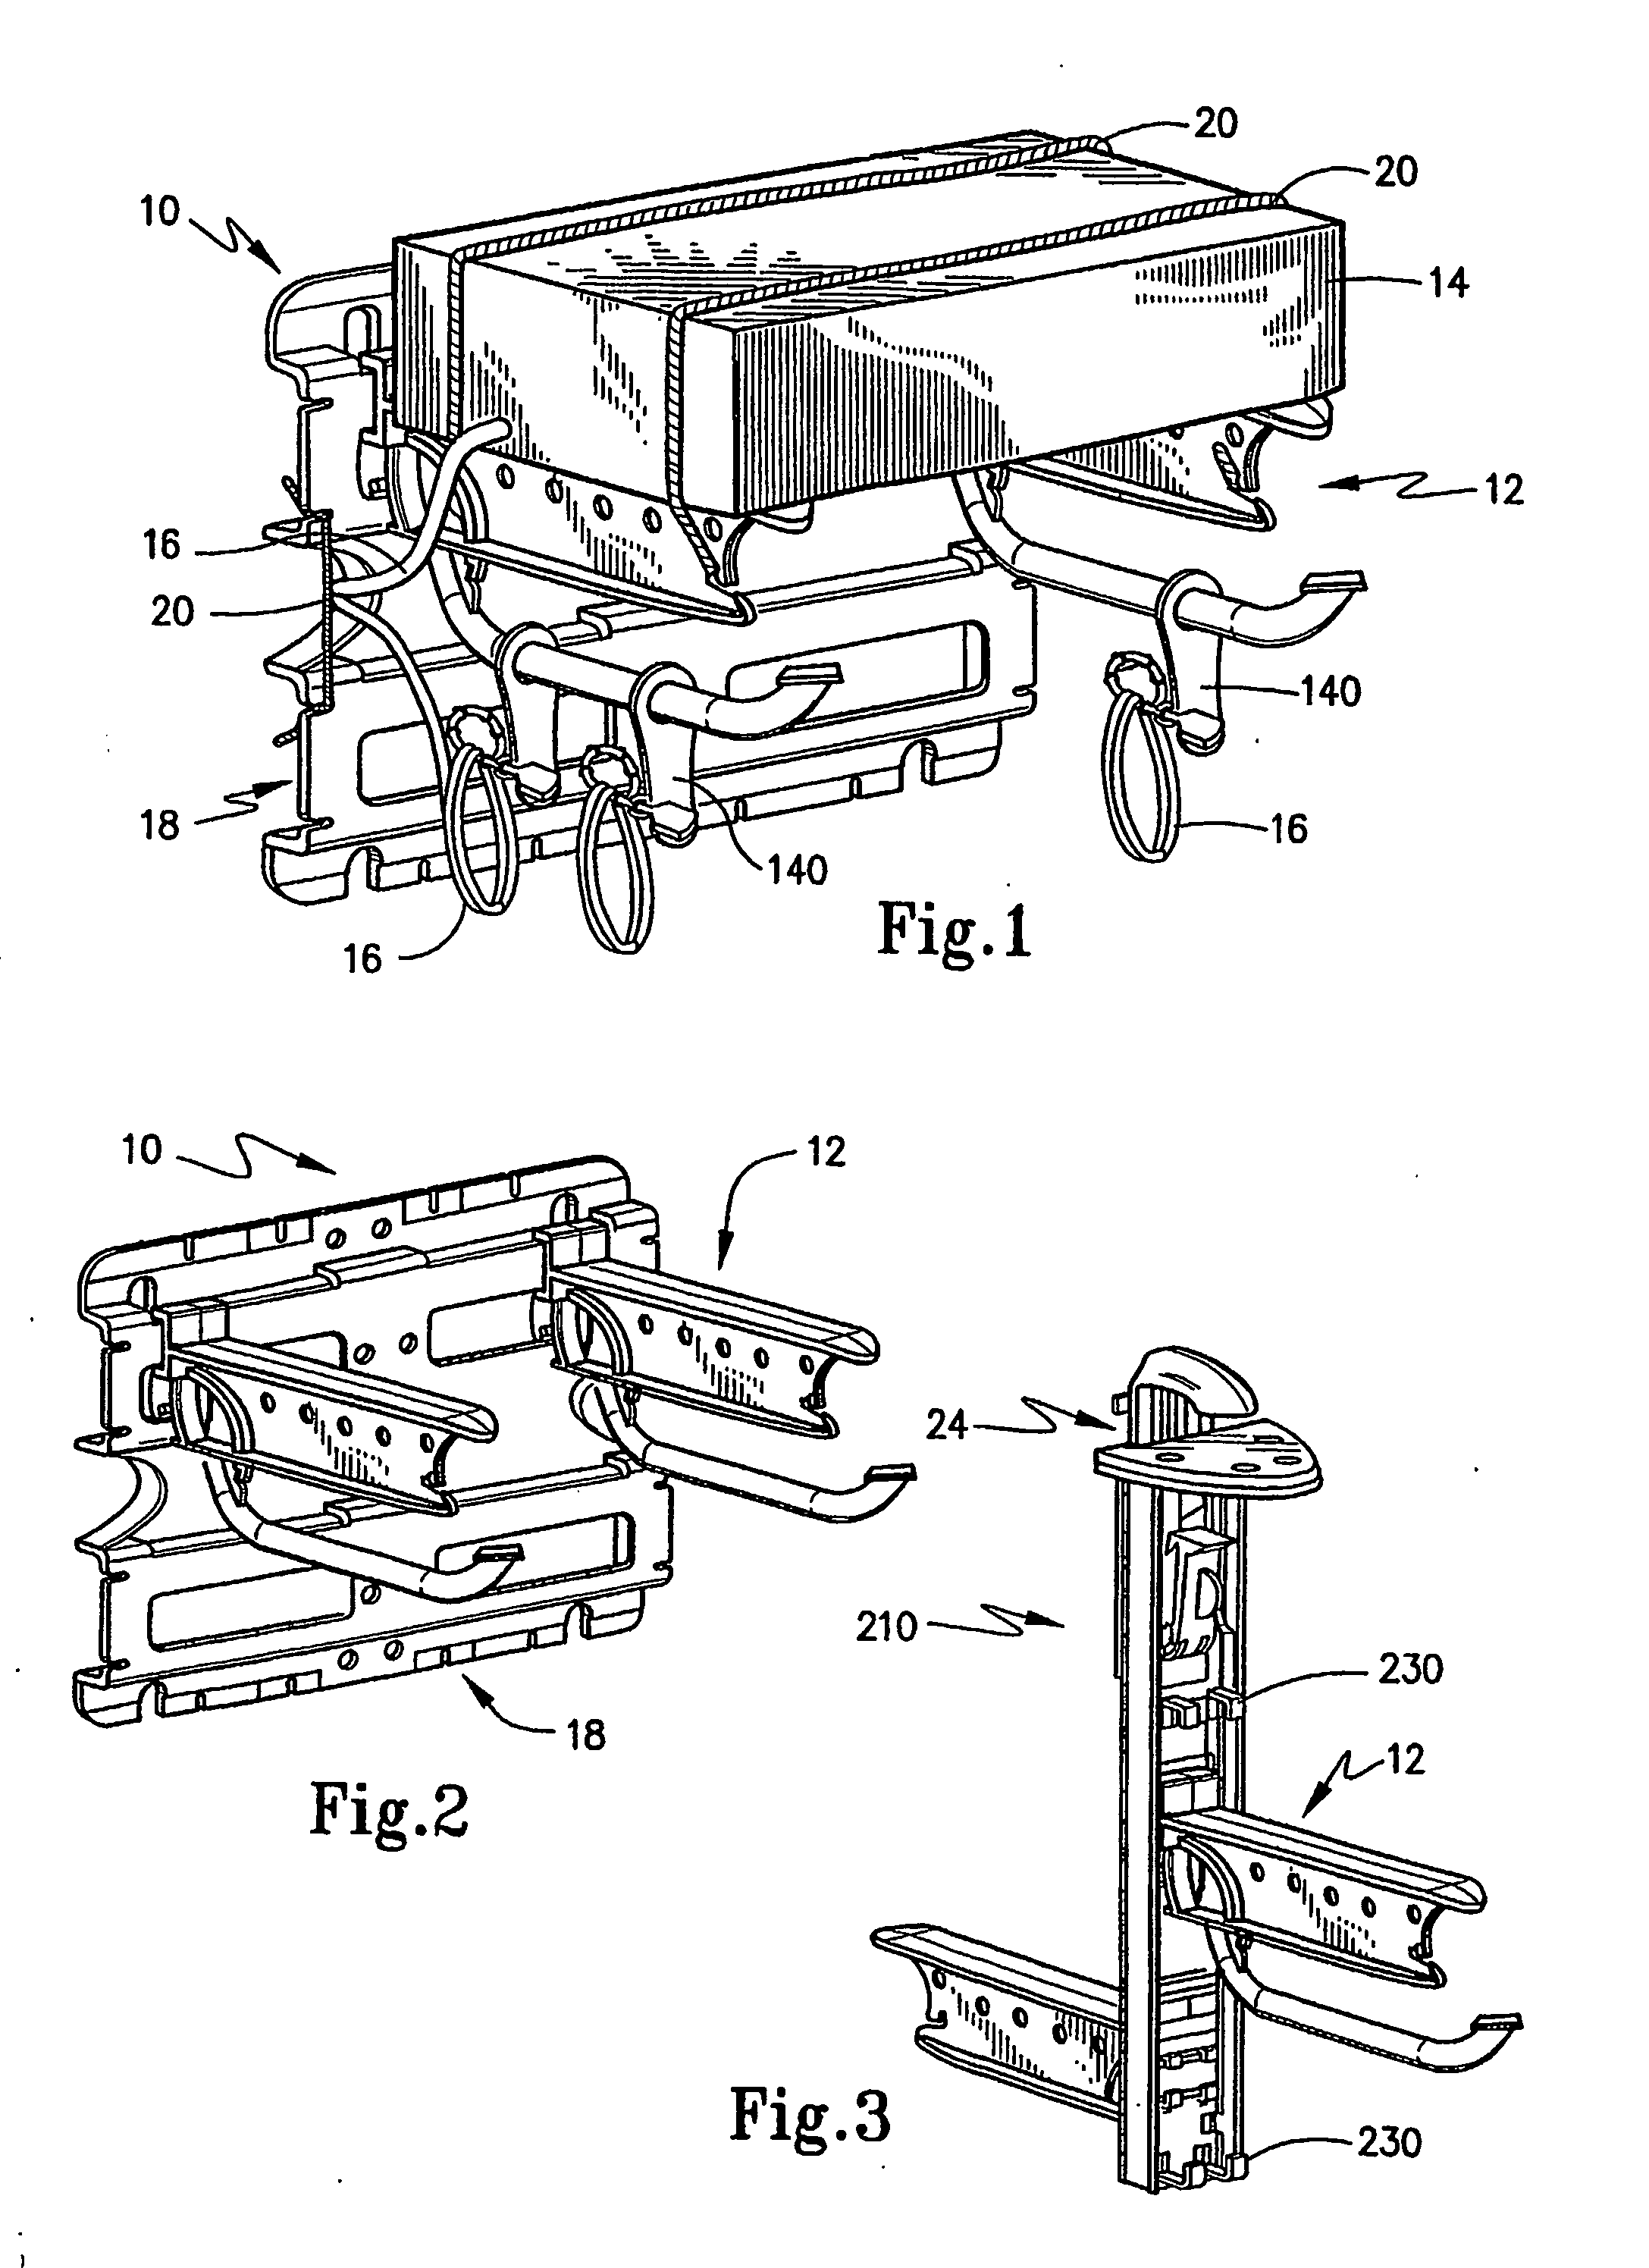 Cable organization and hardware shelving system